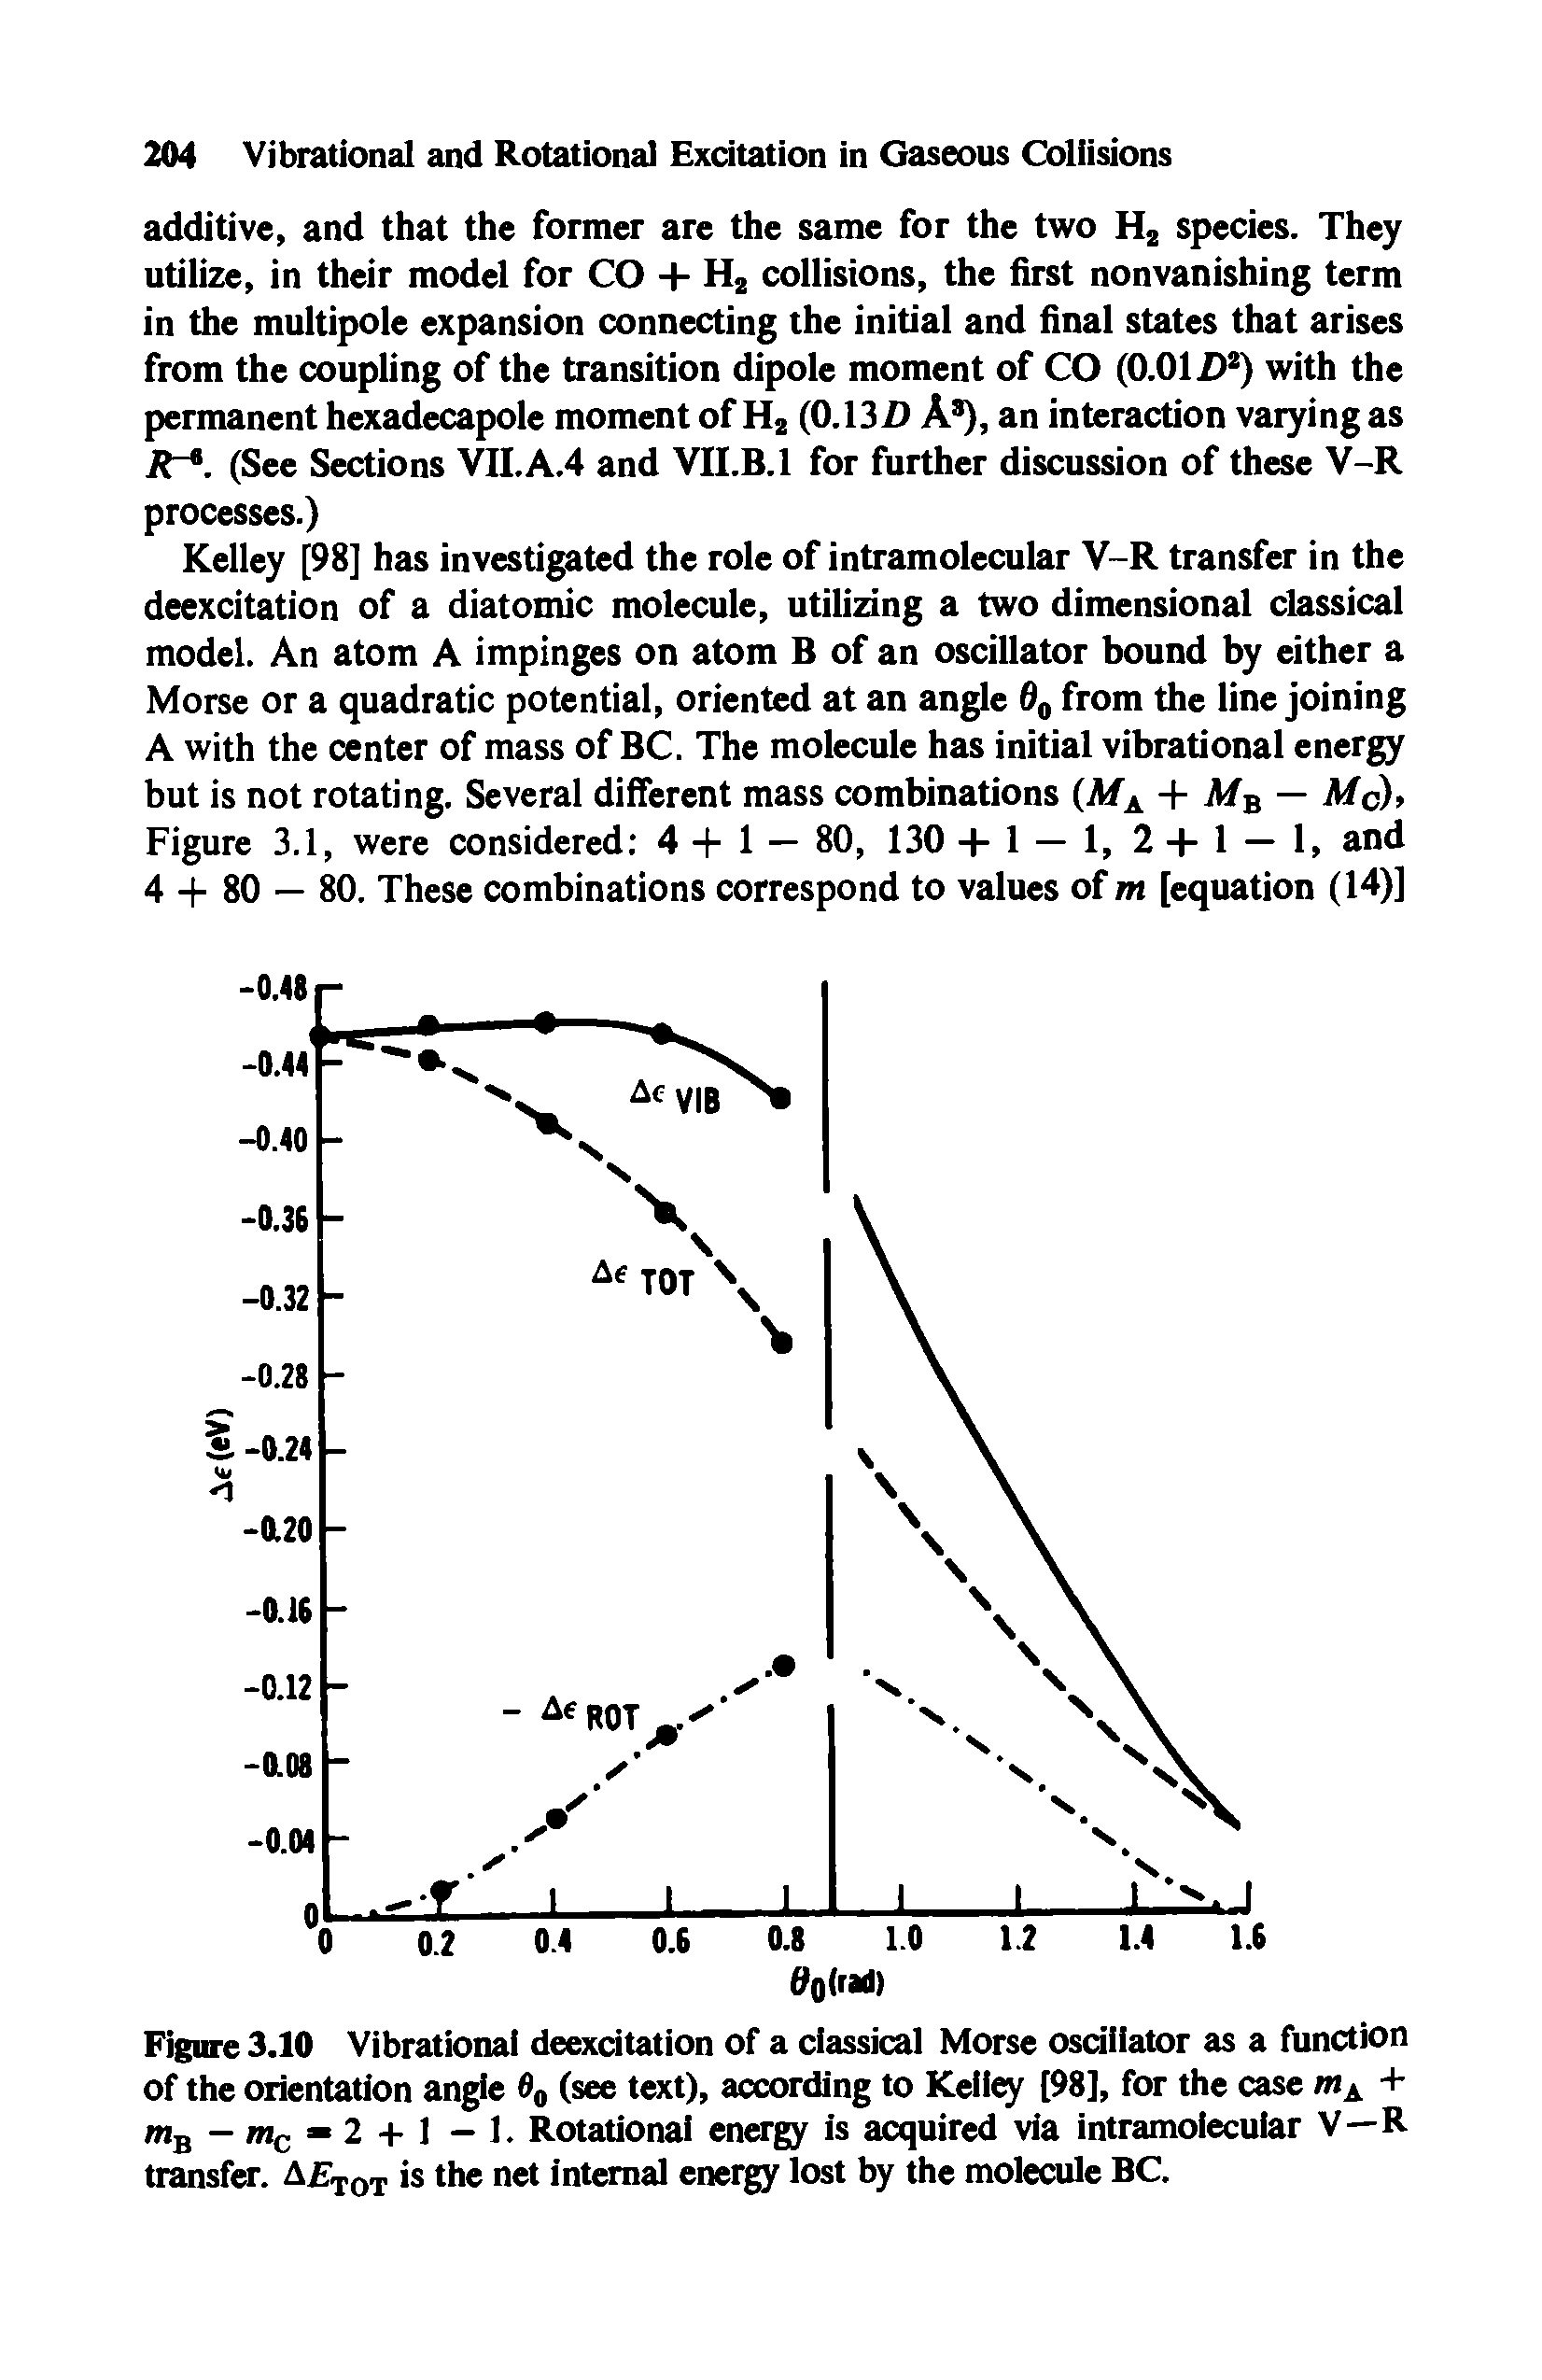 Figure 3.10 Vibrational deexcitation of a classical Morse oscillator as a function of the orientation angle fl0 (see text), according to Kelley [98], for the case mA + mB mc = 2 + 1 - 1. Rotational energy is acquired via intramolecular V—R transfer. AirT0T is the net internal energy lost by the molecule BC.